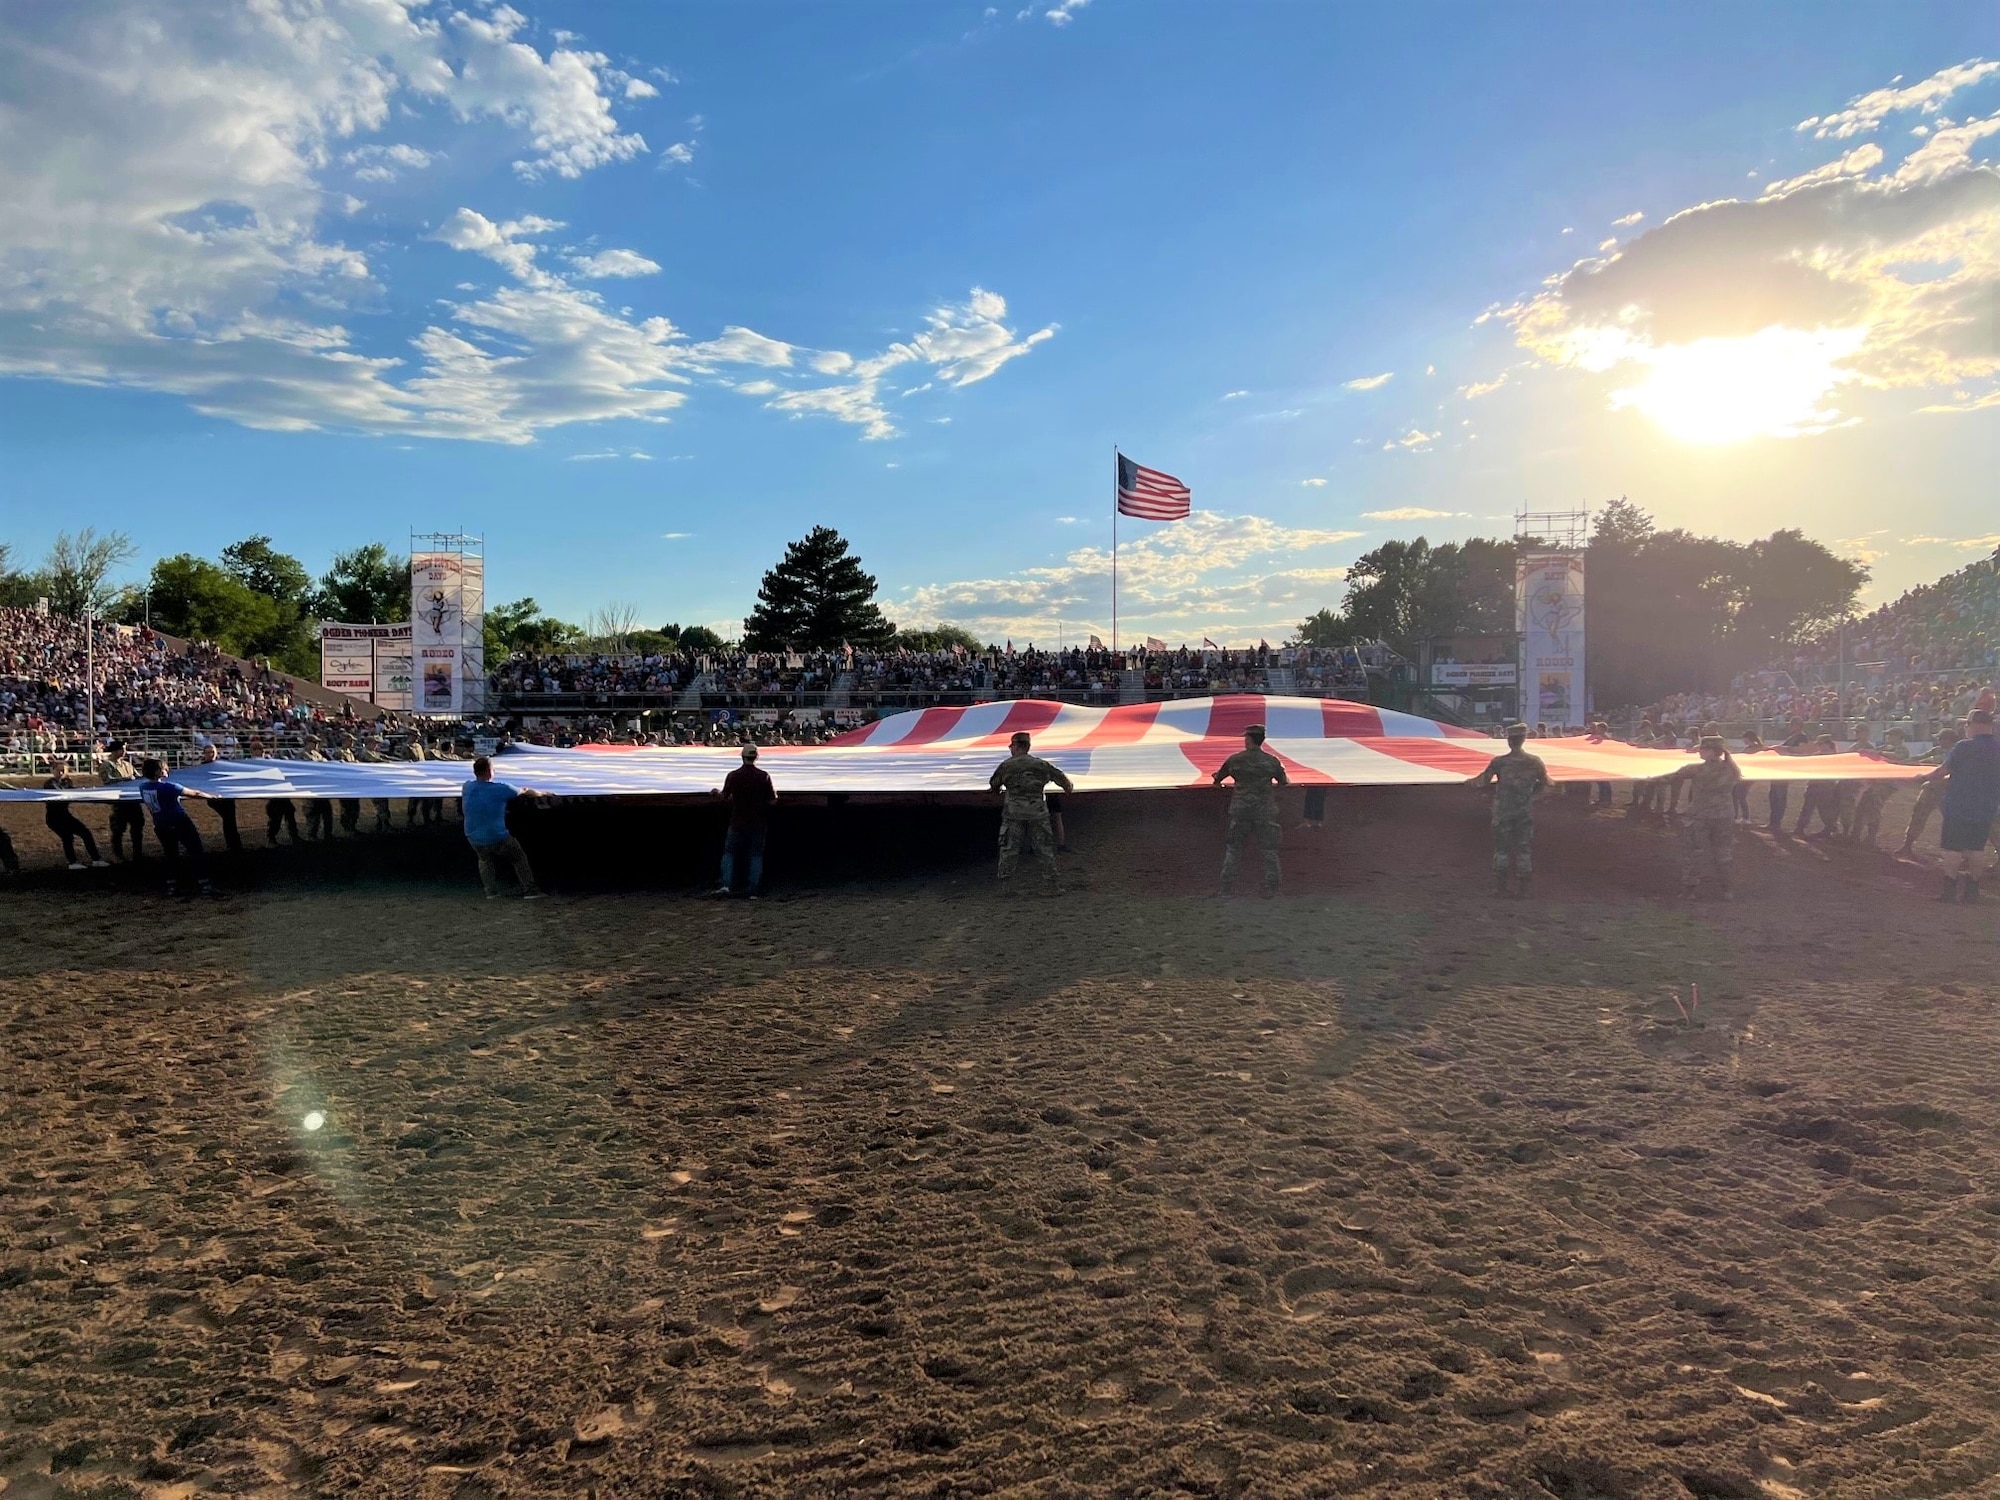 Patriots from Hill AFB joined other Utah service members and celebrated Patriot Night at the Ogden Pioneer Days Rodeo opening ceremony July 22, 2022, by unfurling and displaying “The Major,” a giant American flag in Ogden, Utah